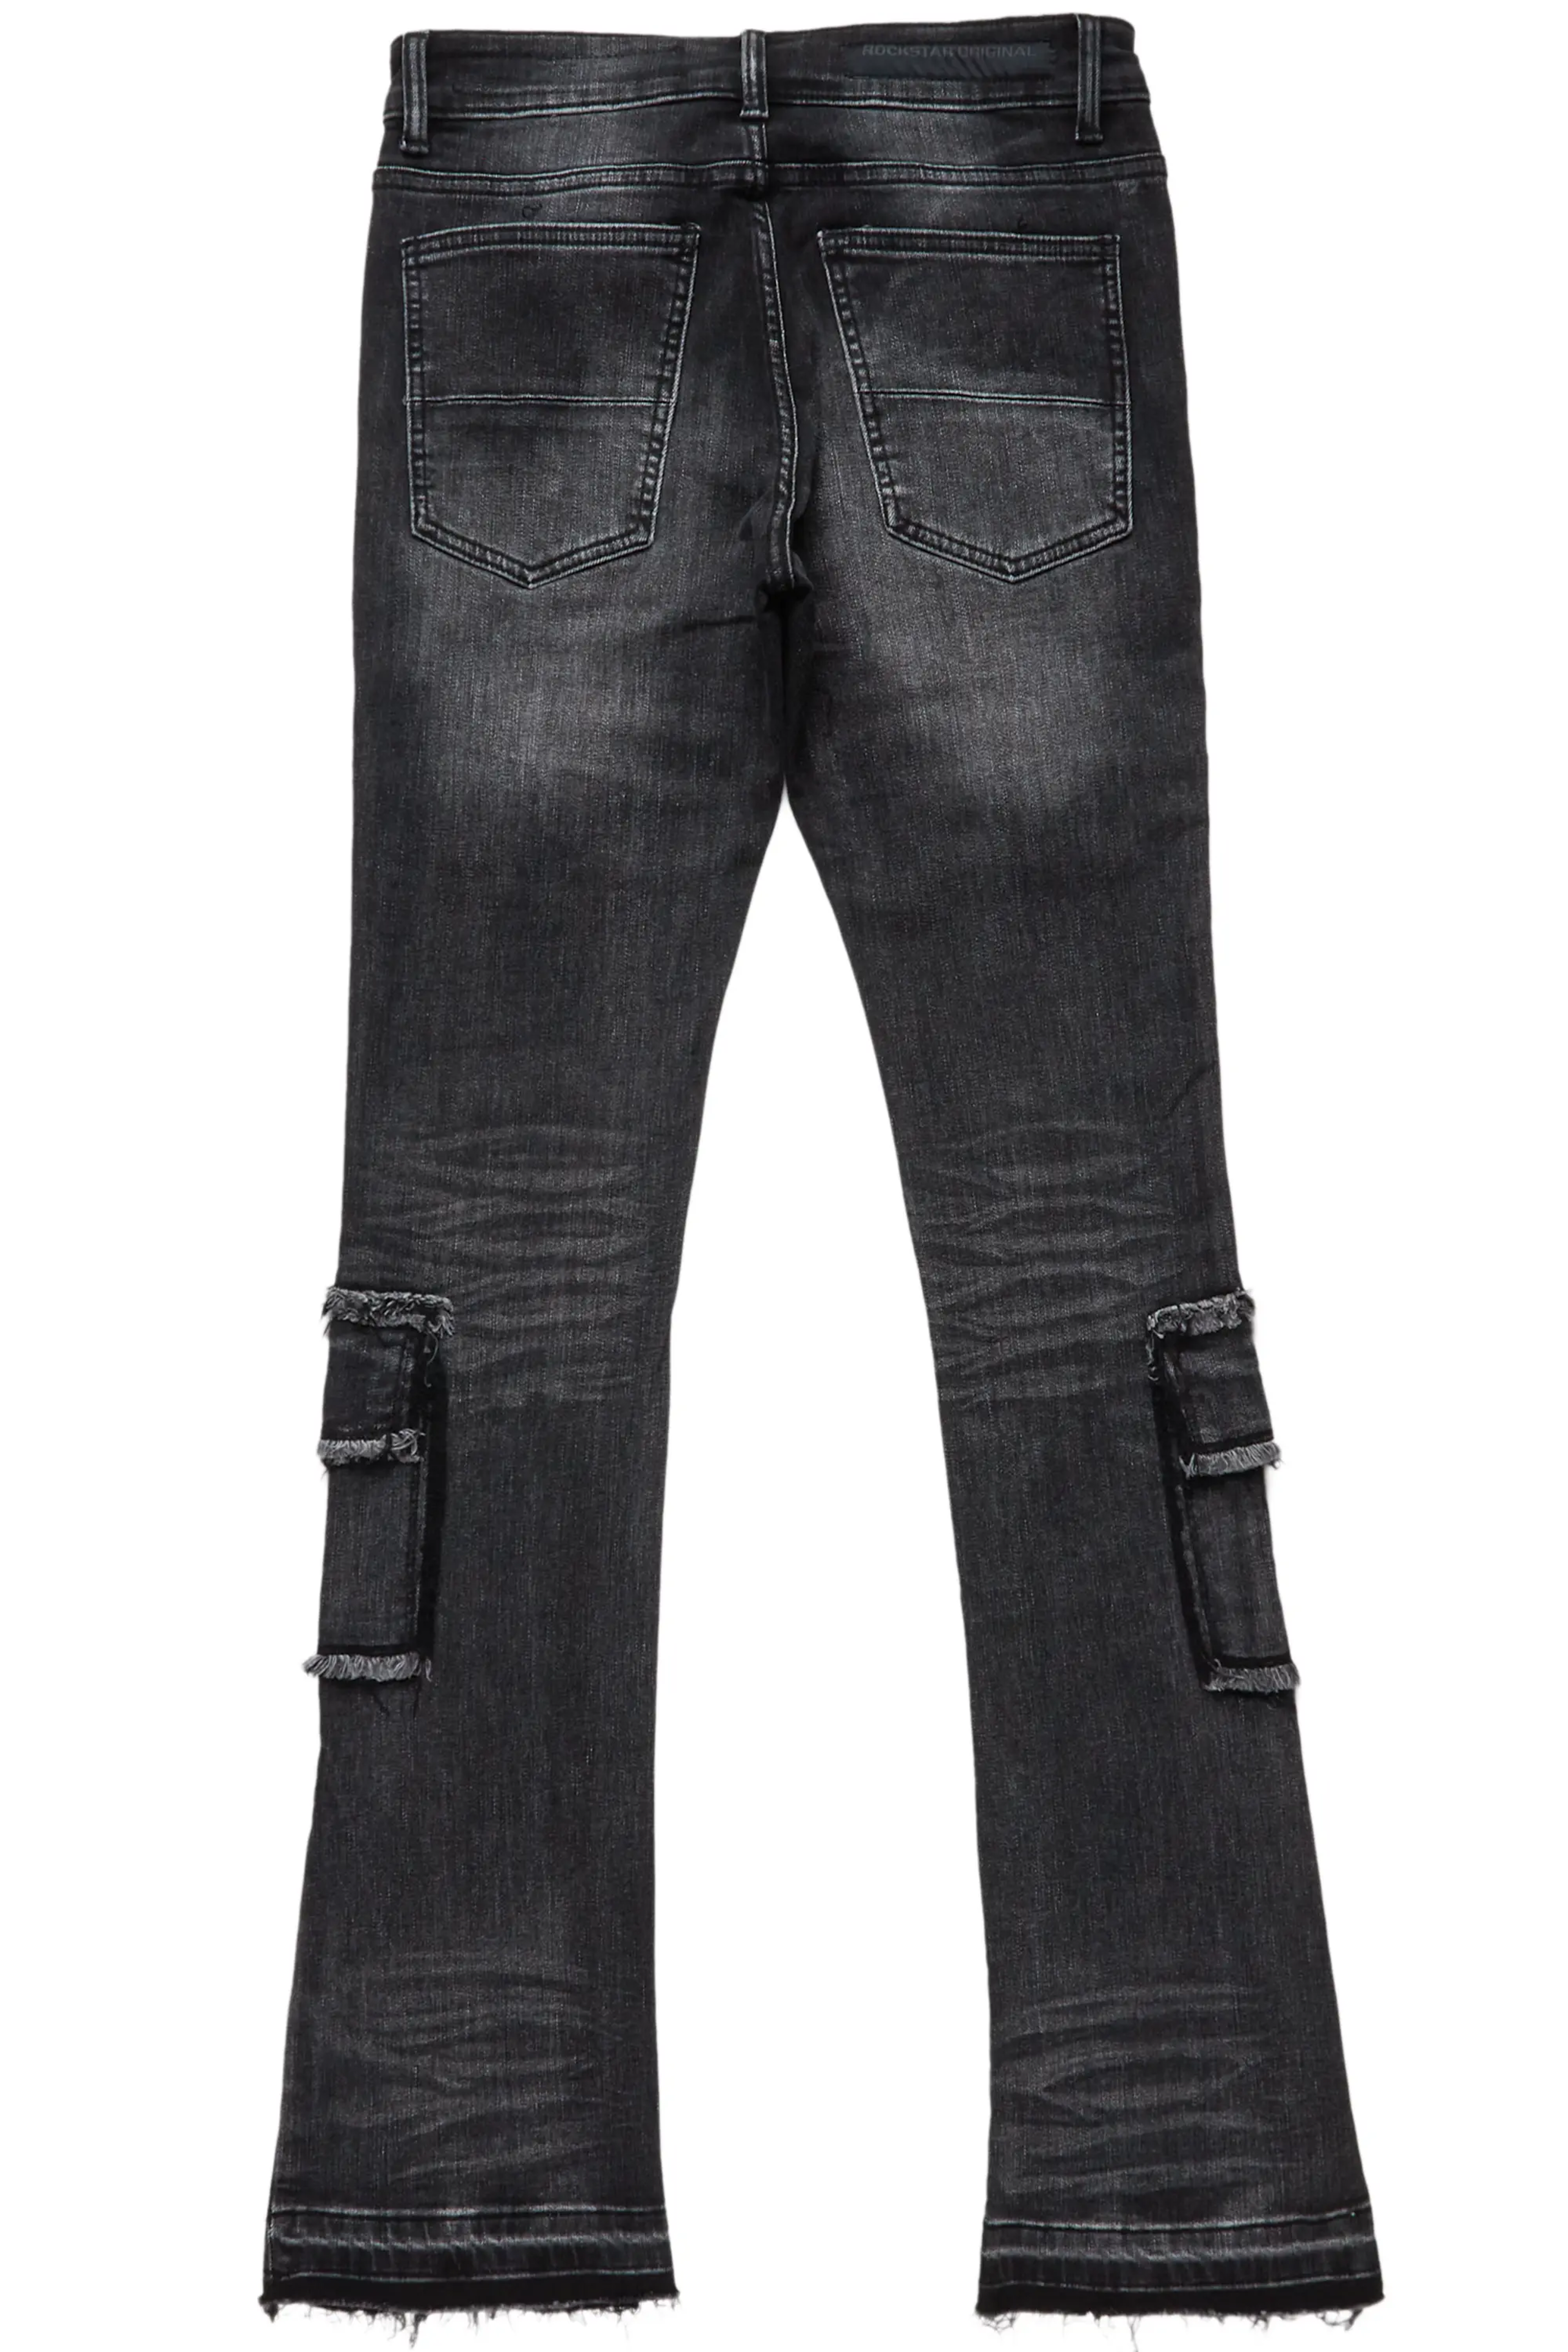 Alternate View 13 of Tyrell Grey Stacked Flare Cargo Jean